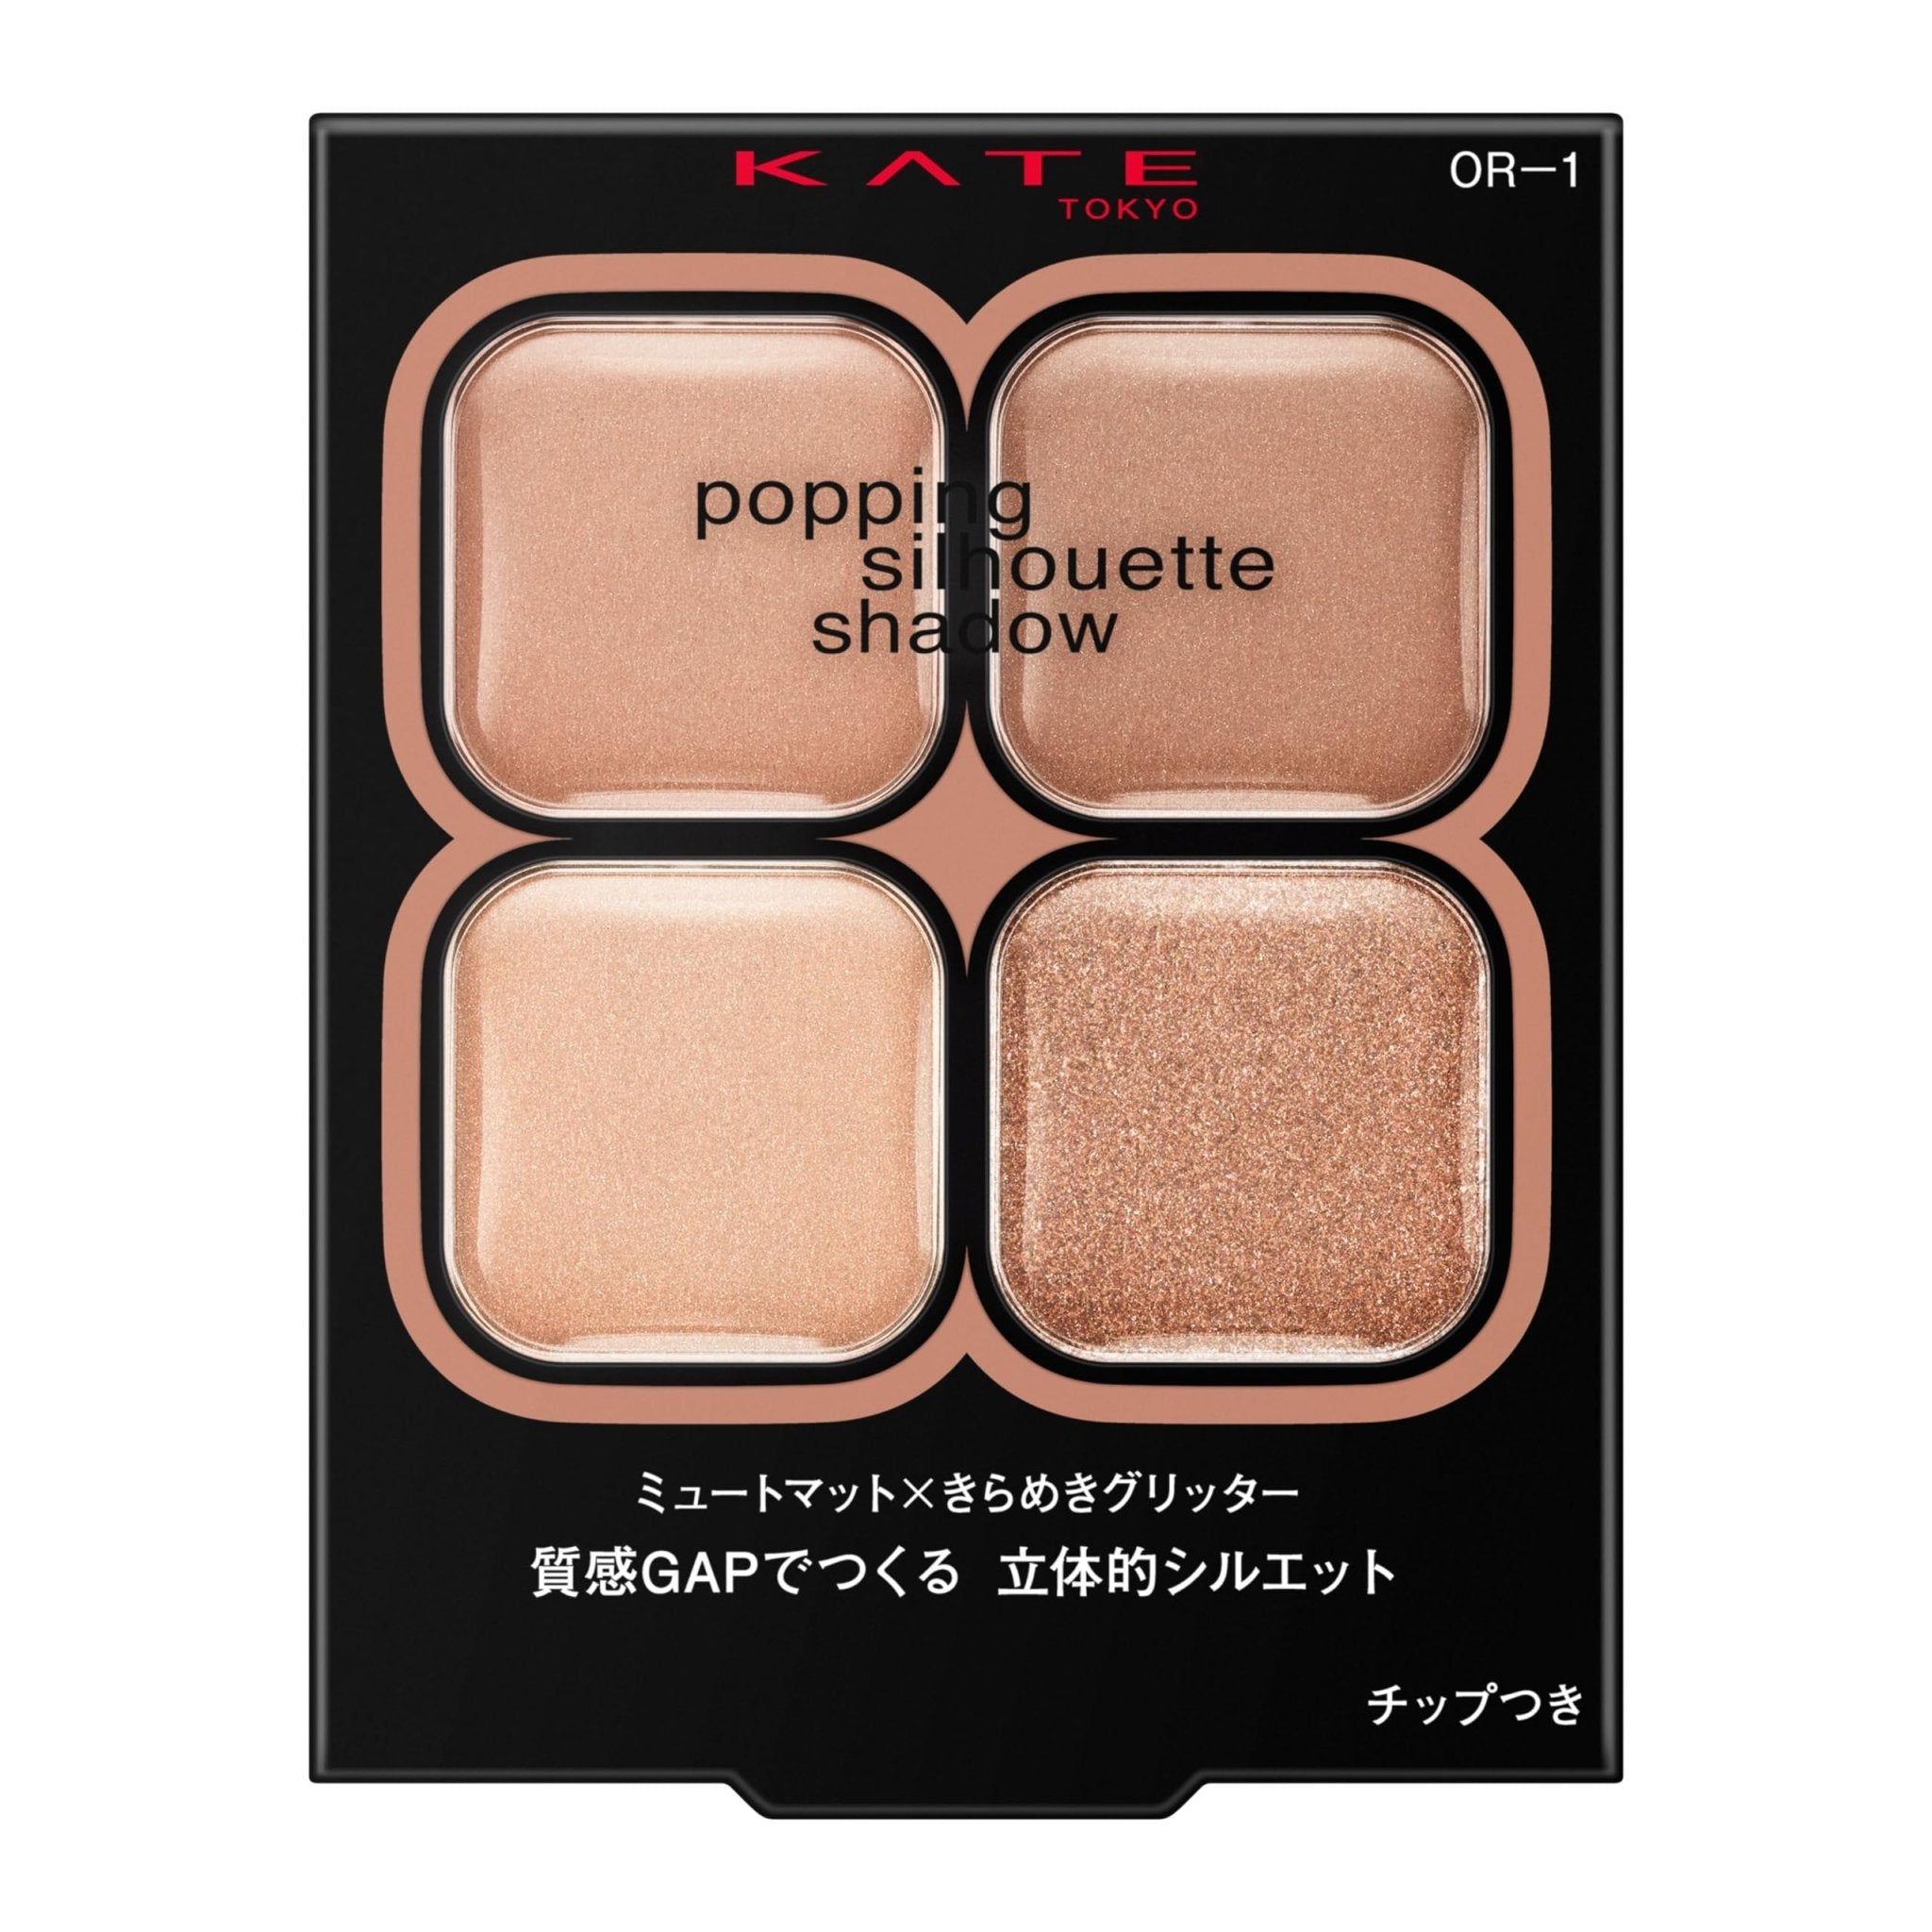 Kate Popping Silhouette Shadow Or - 1 Premium Eye Makeup Product by Kate